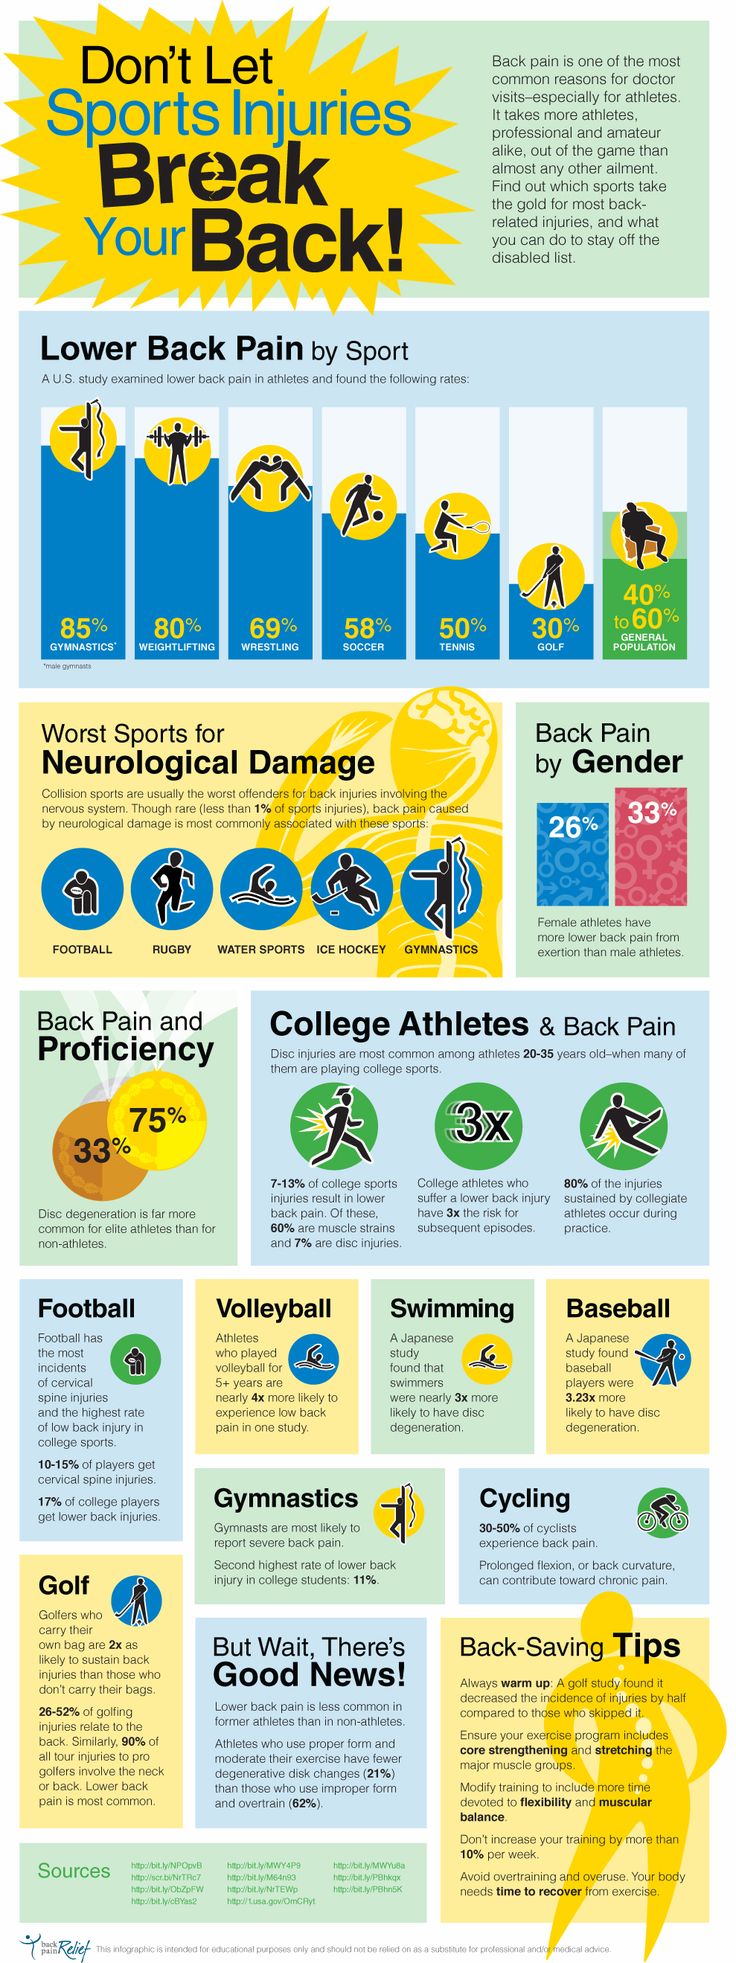 Lower Back Pain In Sport Infographic